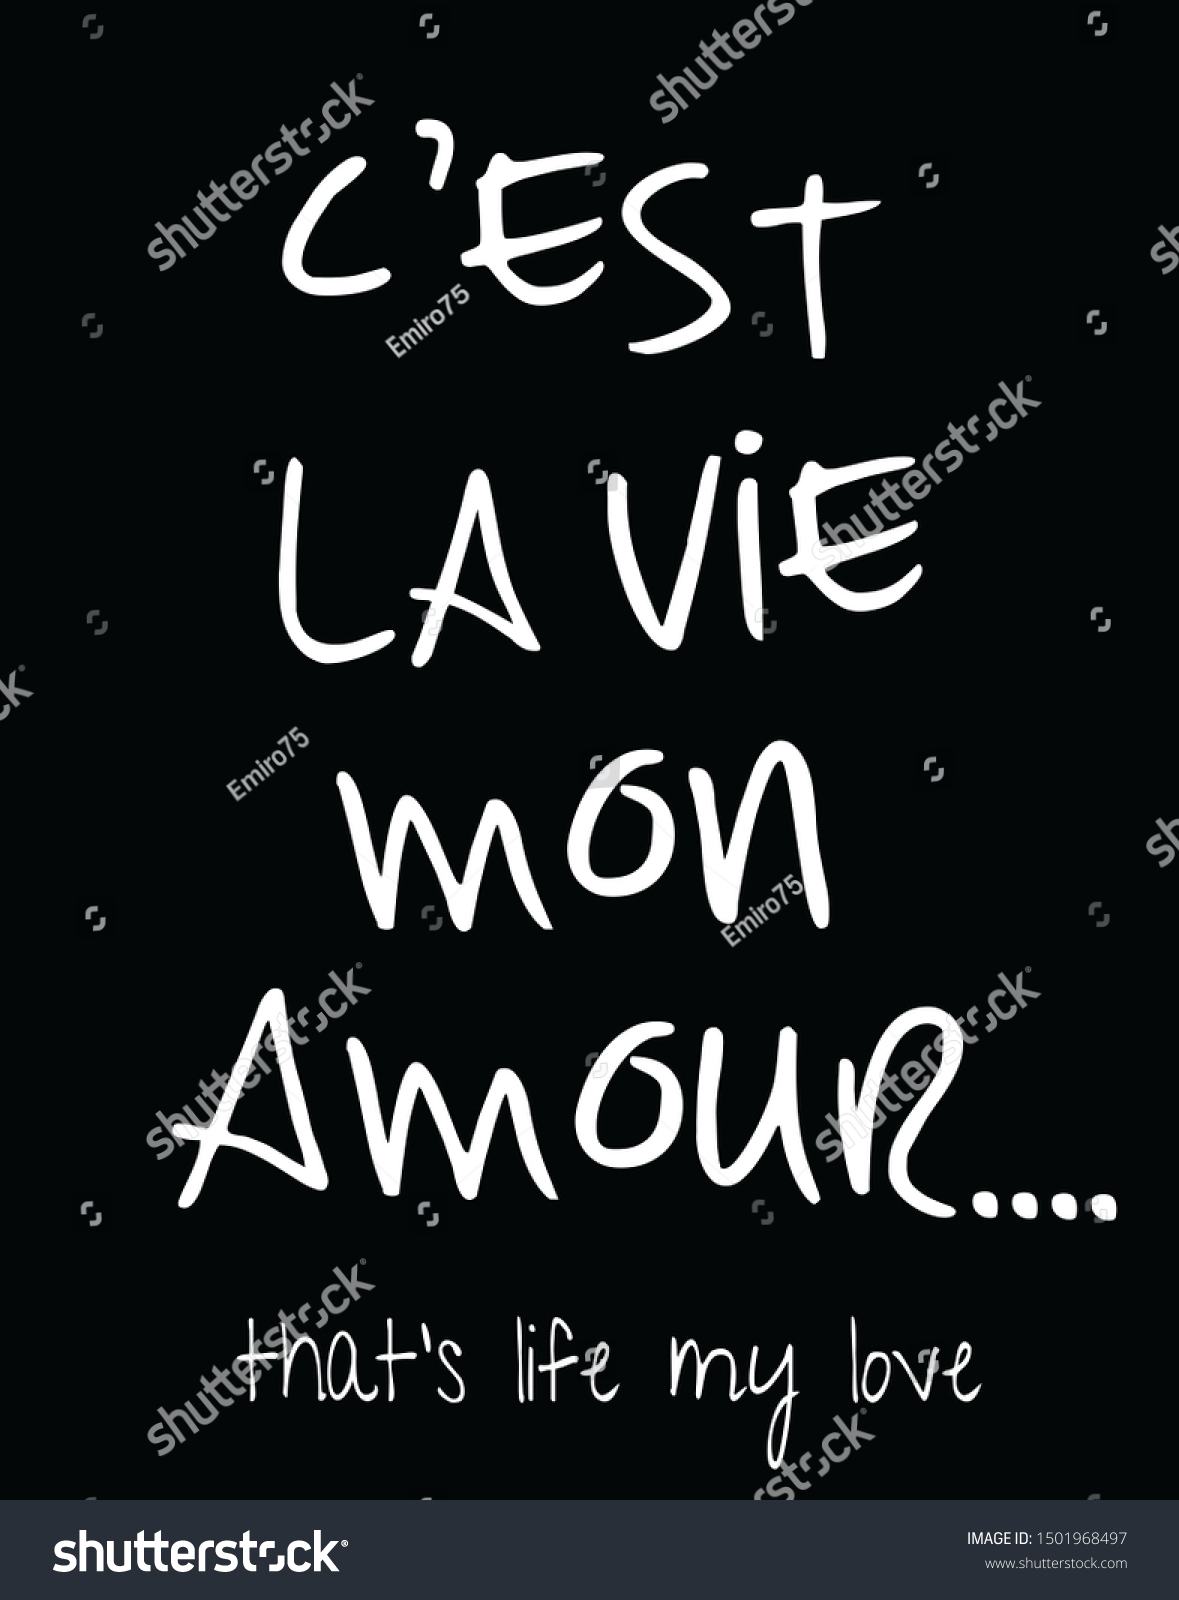 What does mon Amour mean?